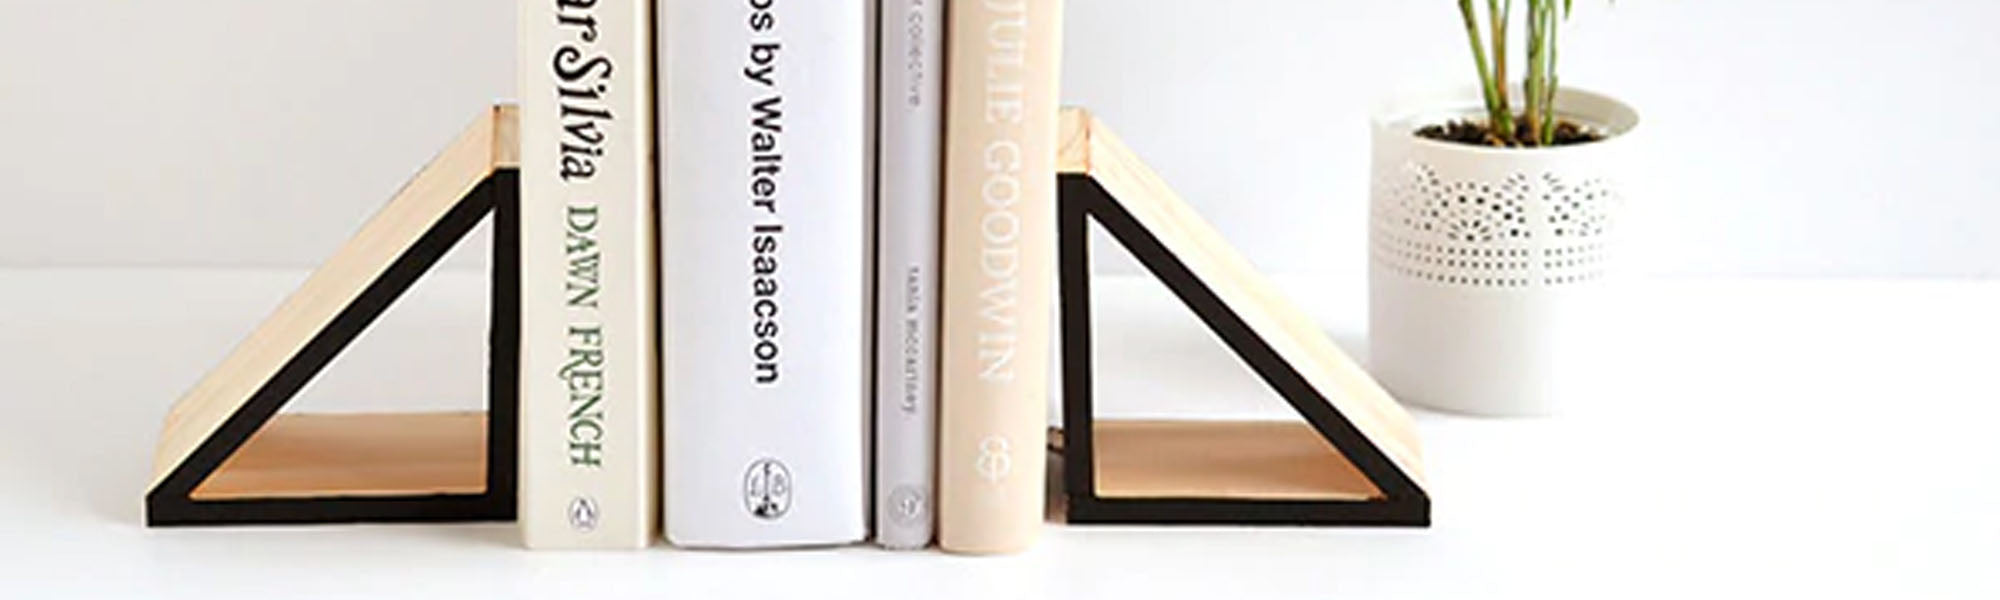 Beautiful wooden triangular bookends with books inside